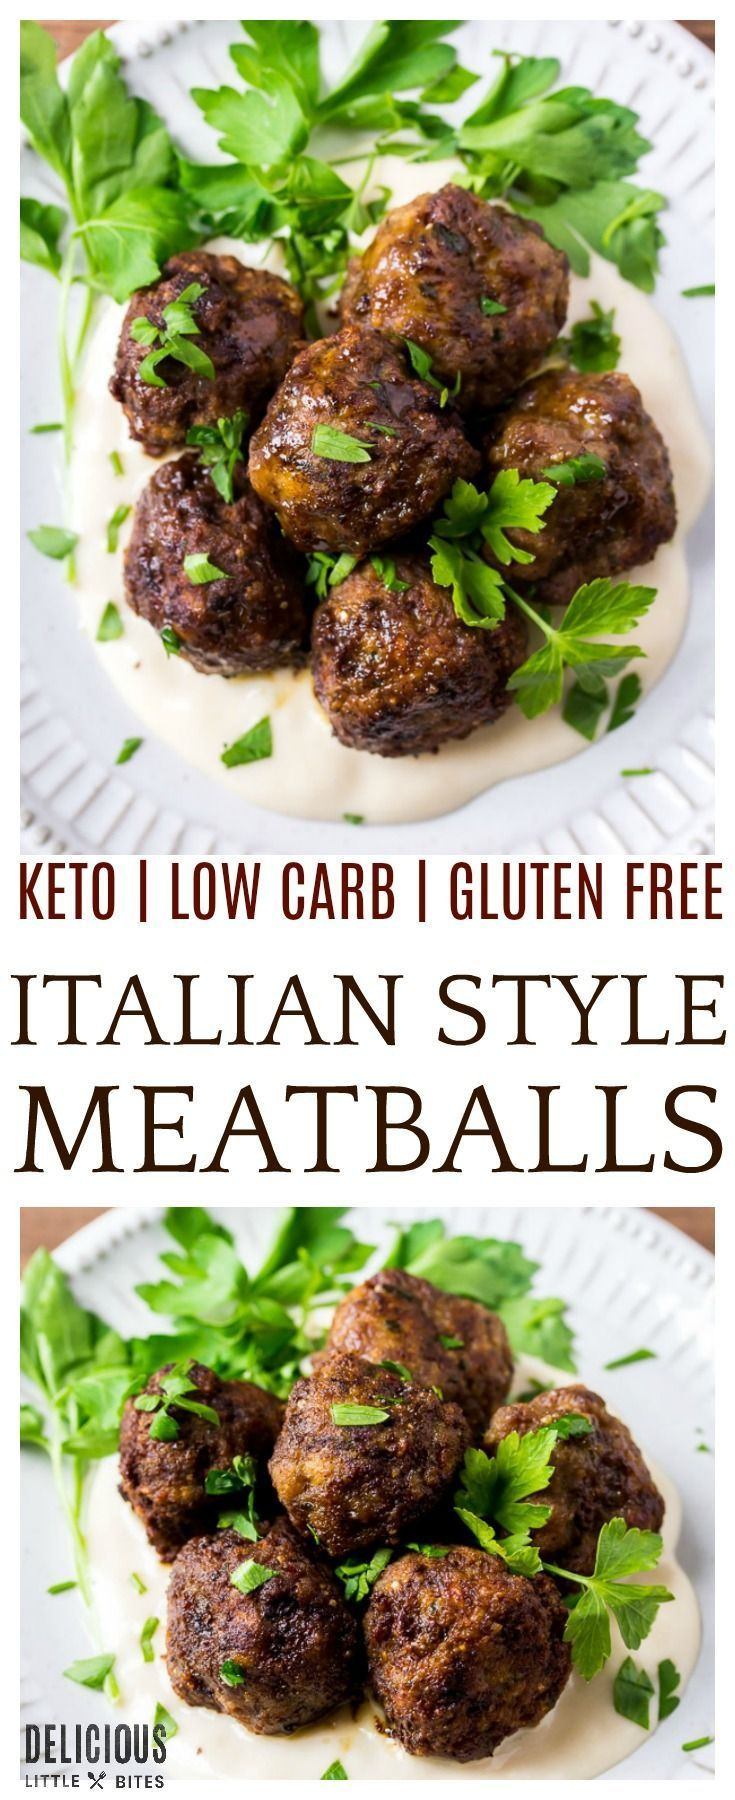 Ground Beef Keto Meatballs
 Keto Italian Meatballs made with ground beef and the